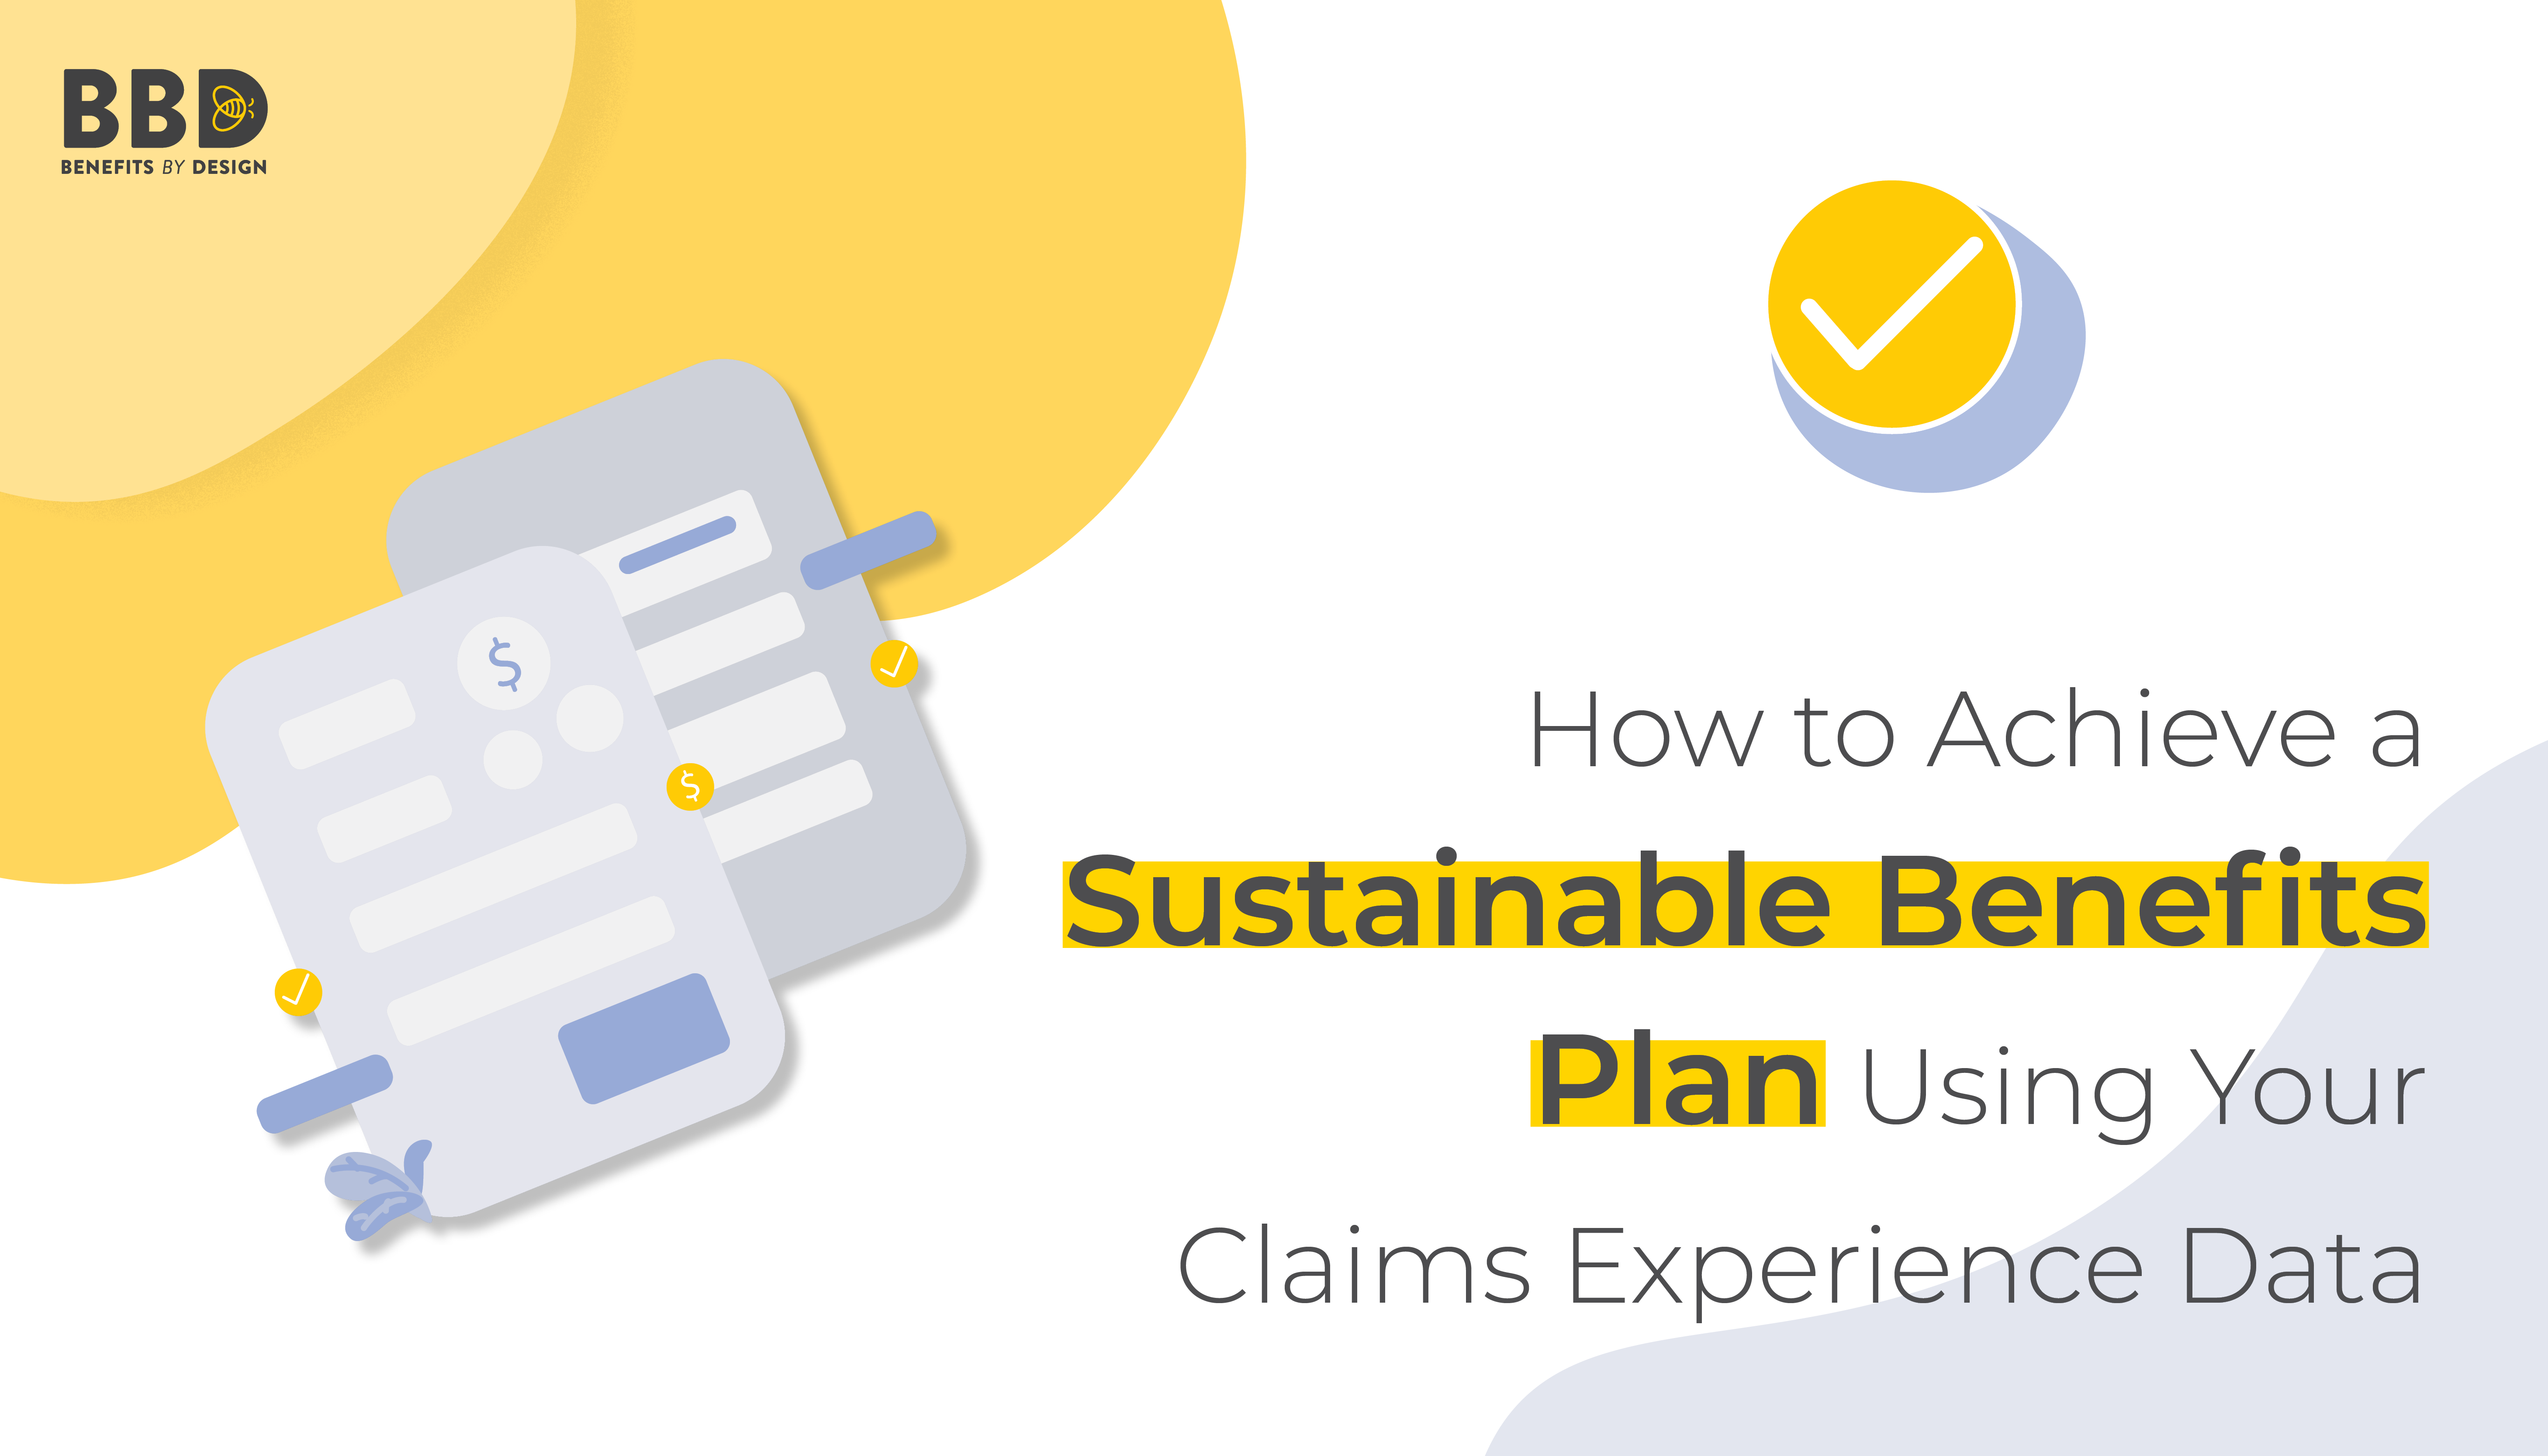 How to Achieve a Sustainable Benefits Plan Using Your Claims Experience Data